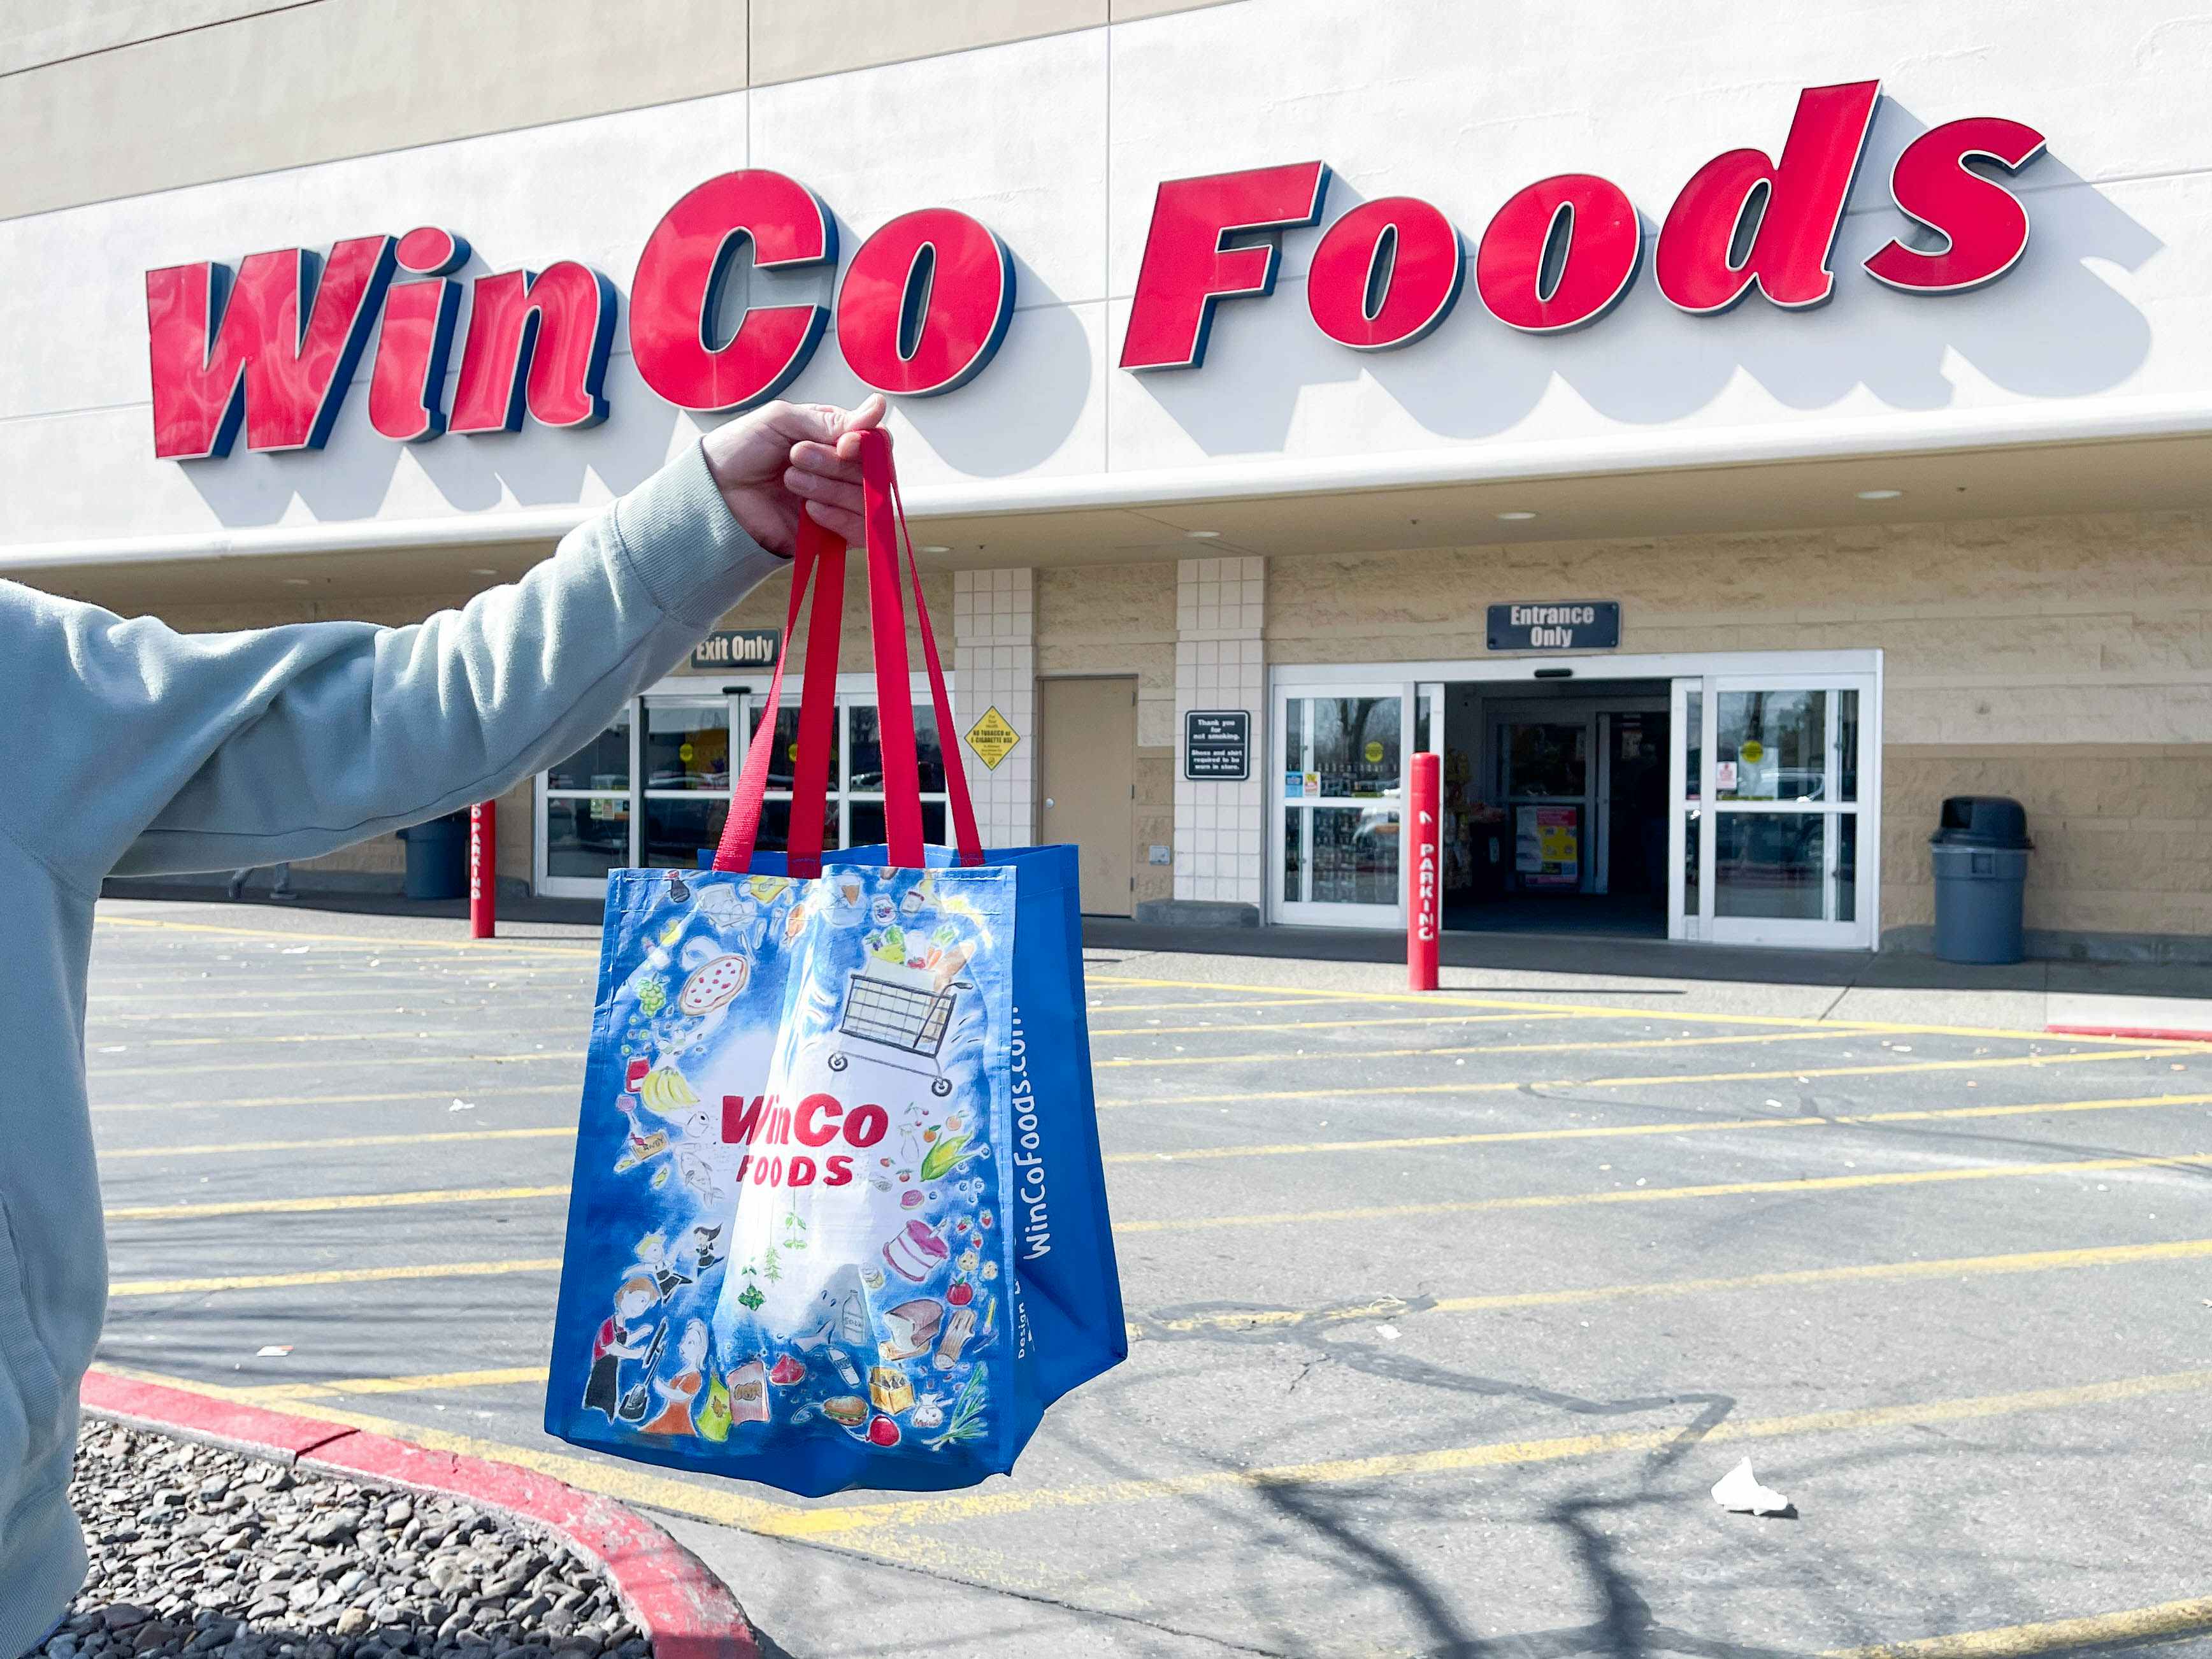 winco reusable shopping bag being held up